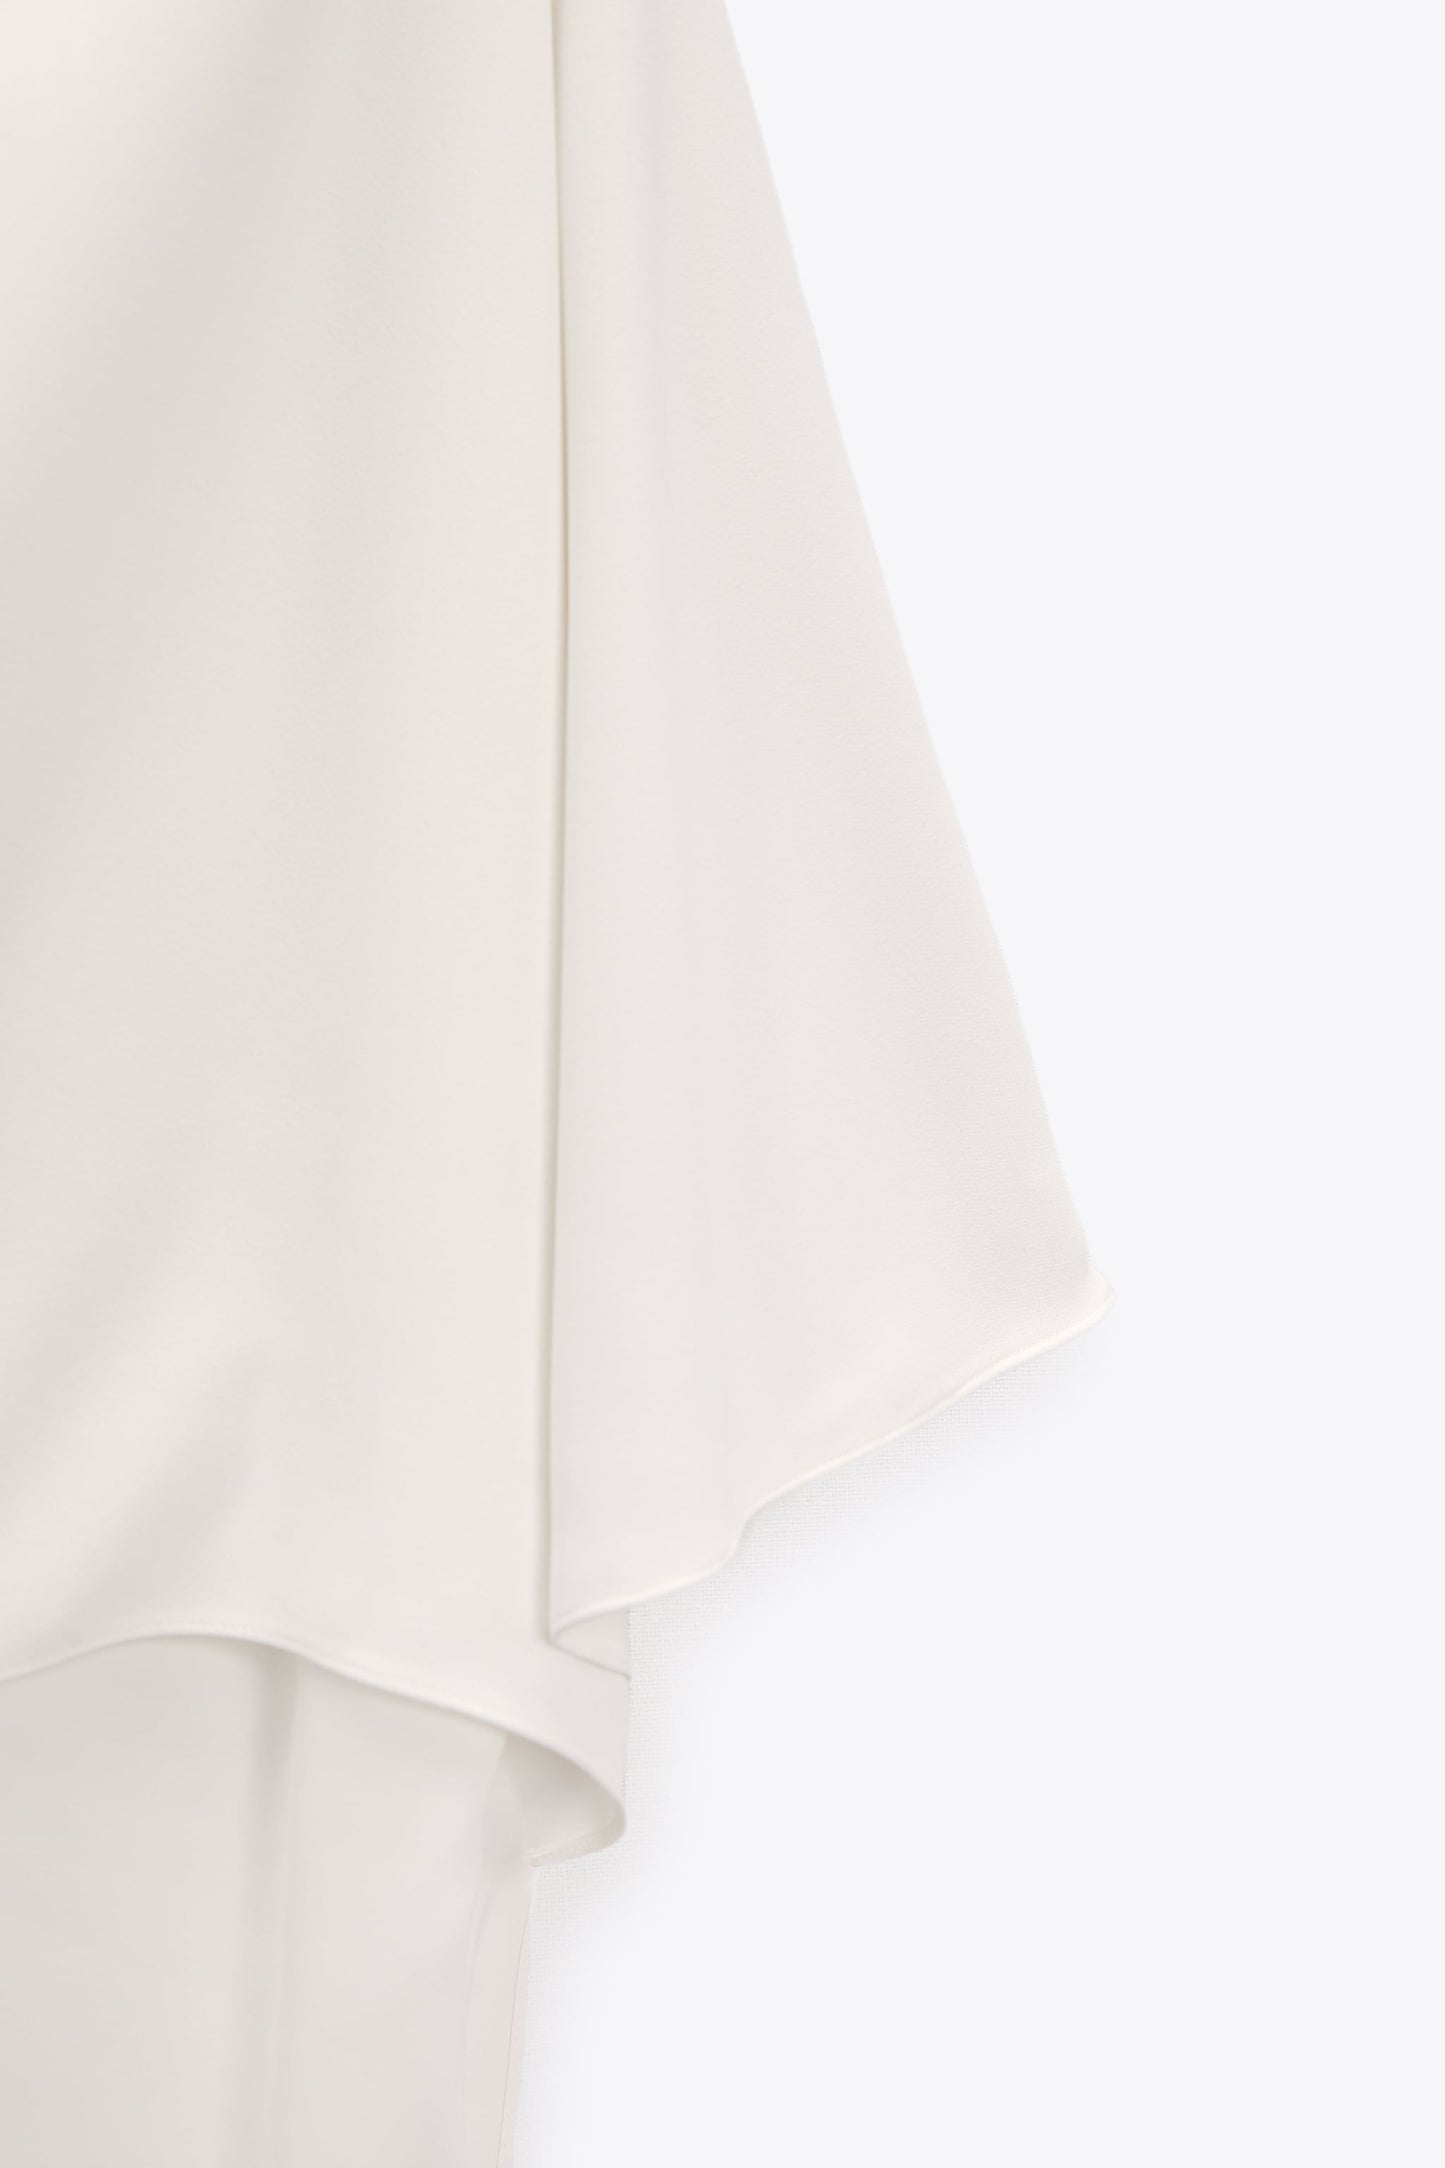 Ivory Illusion | One-Shoulder Asymmetrical Top